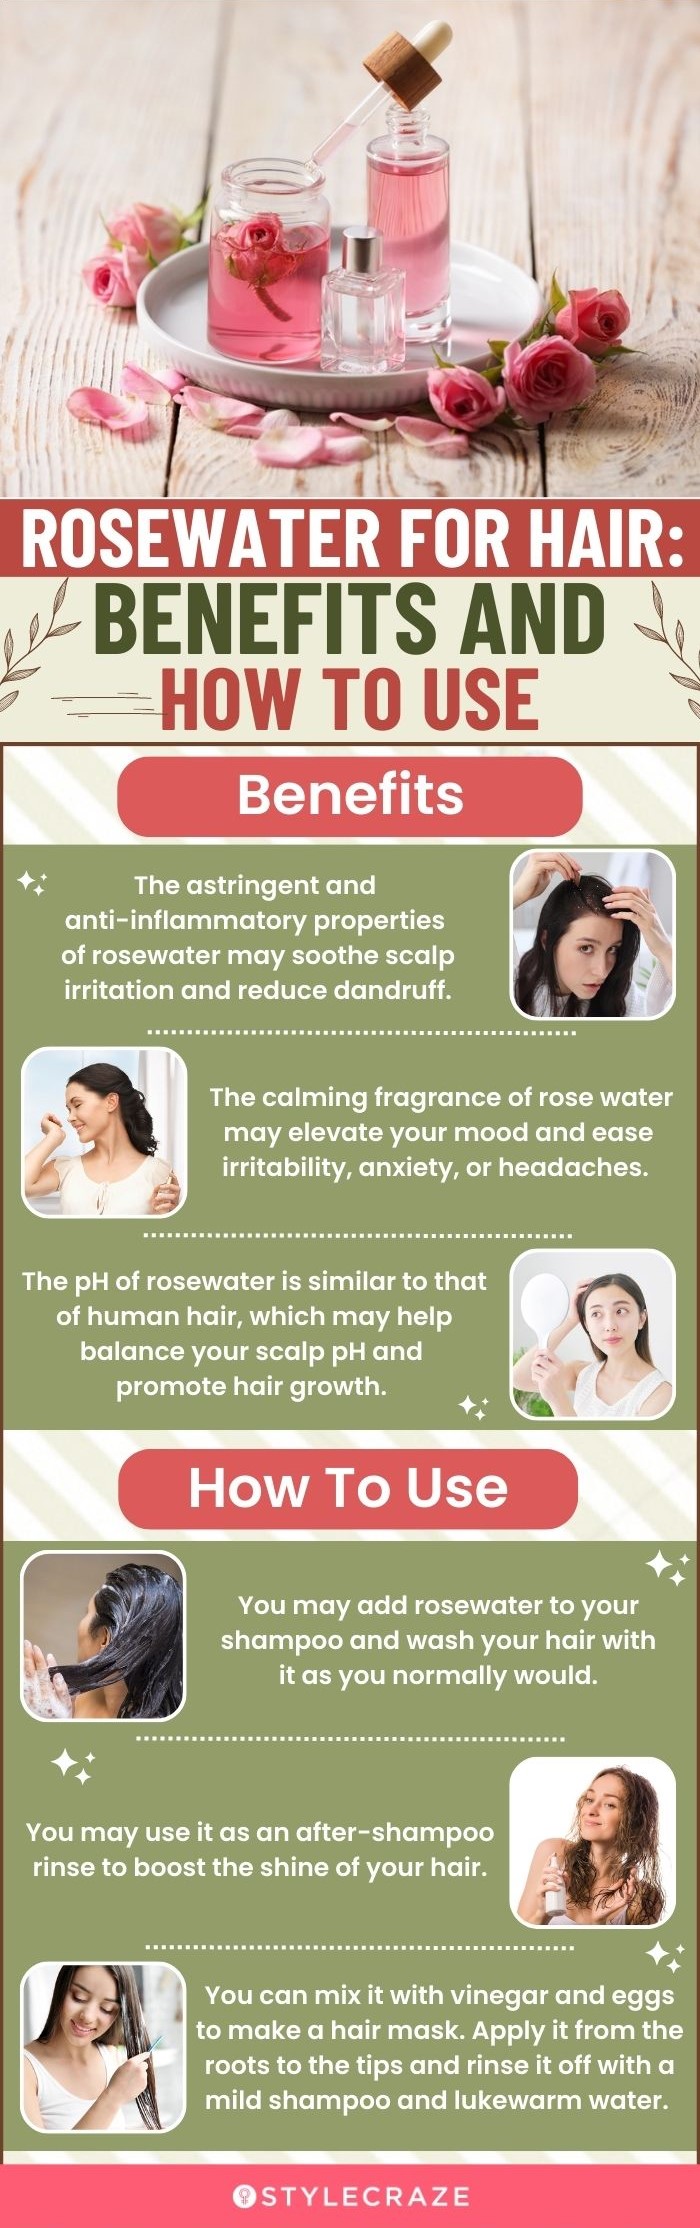 rosewater for hair benefits and and how to use (infographic)